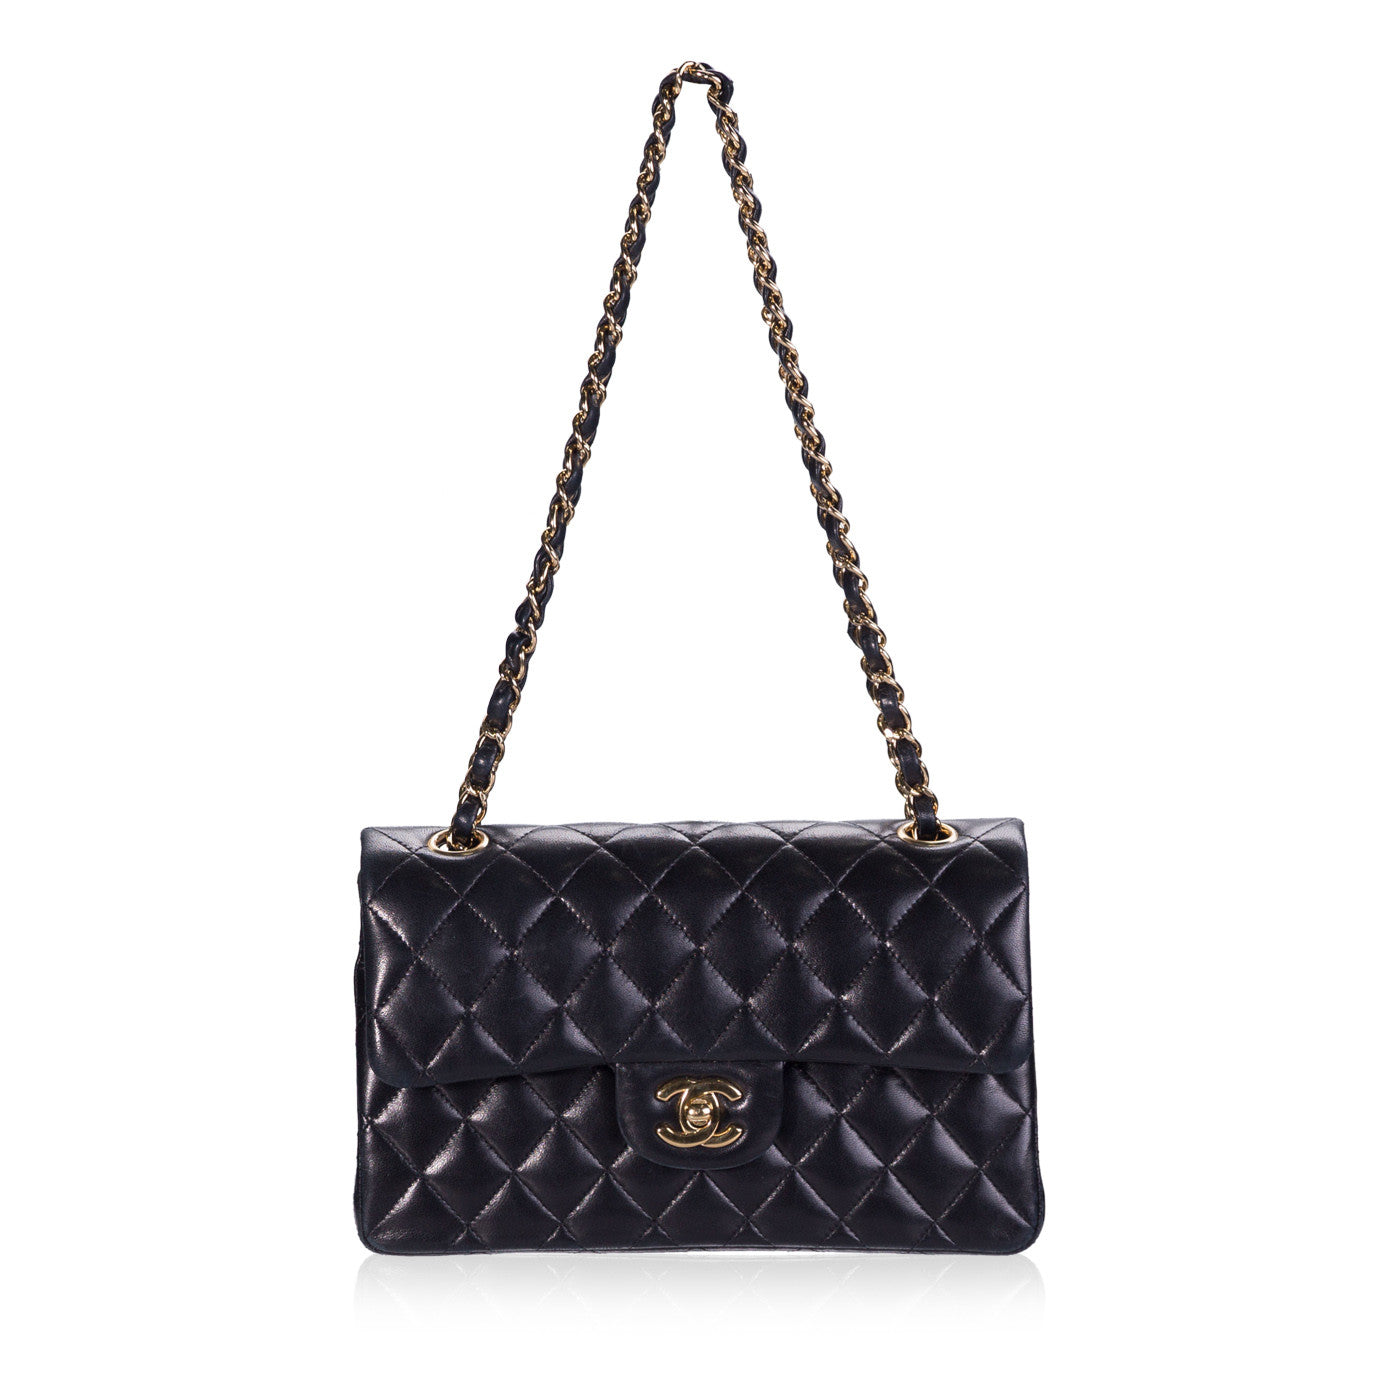 How Chanel Reinterpreted Its Classic 11.12 Bag - Chanel 11.12 Bag Review